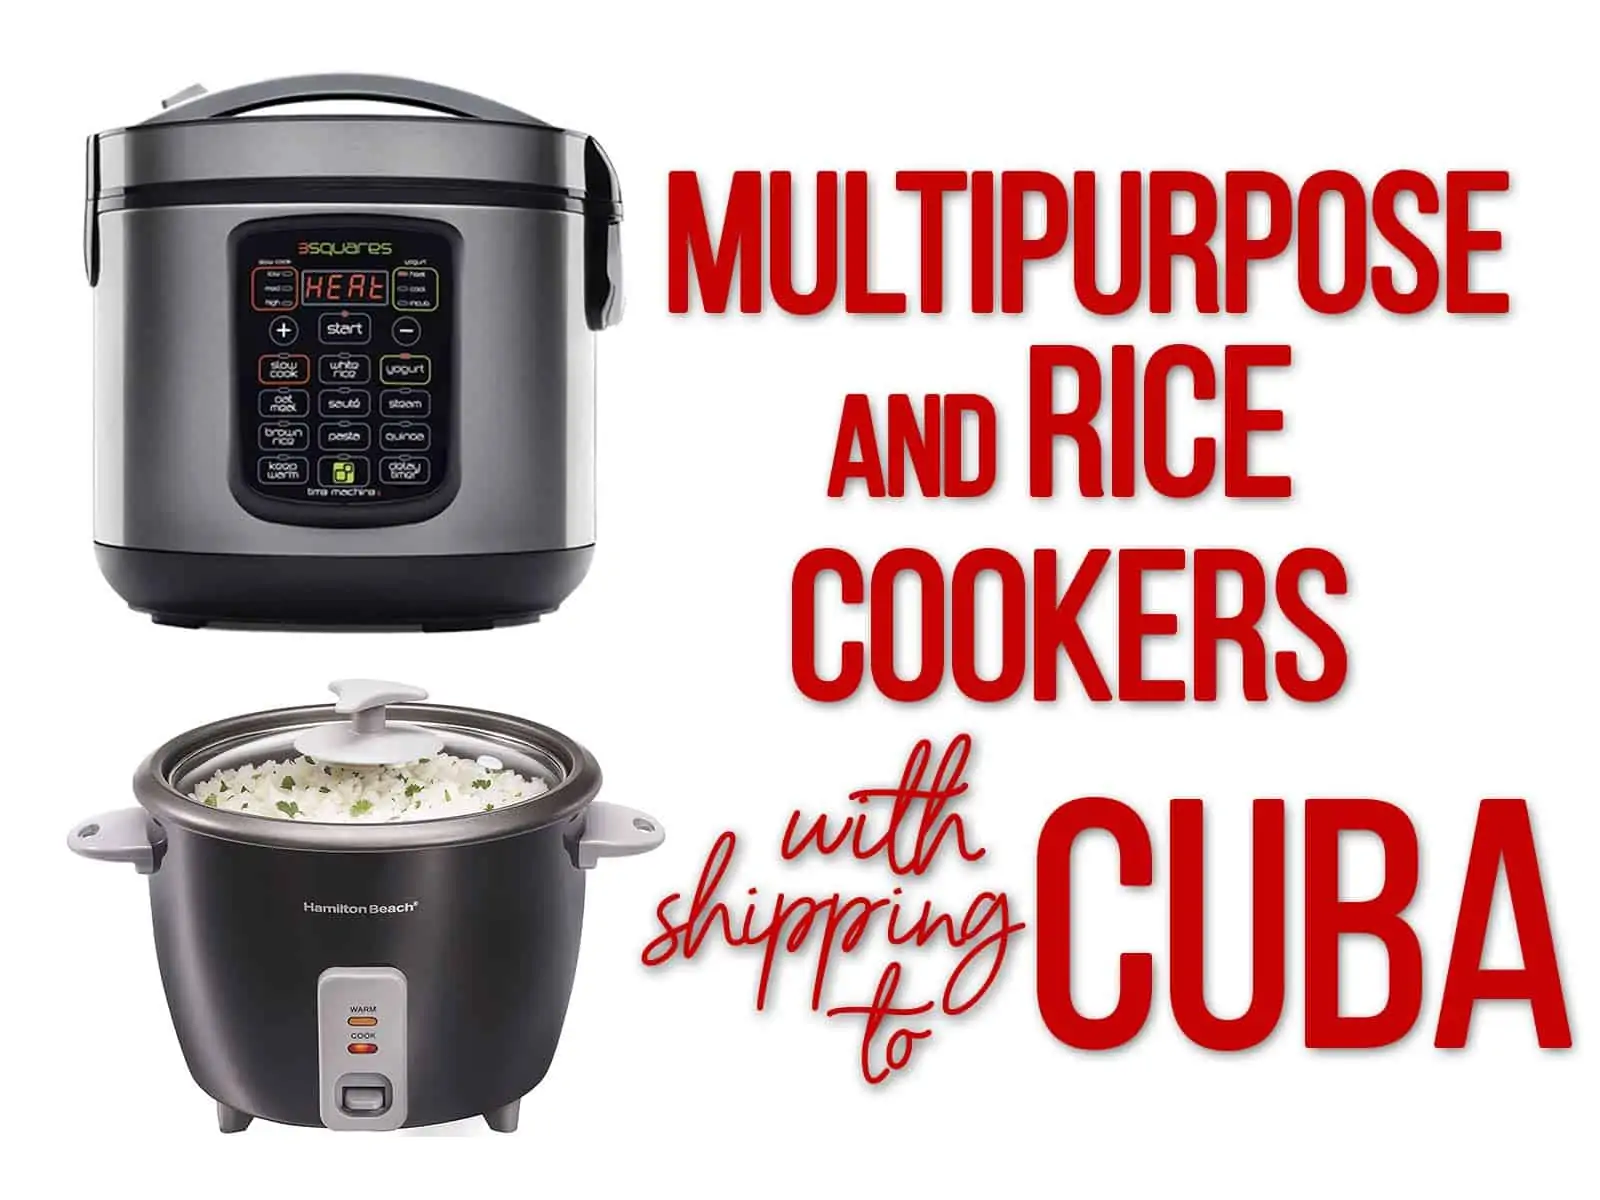 multipurpose cookers and rice cookers cuba